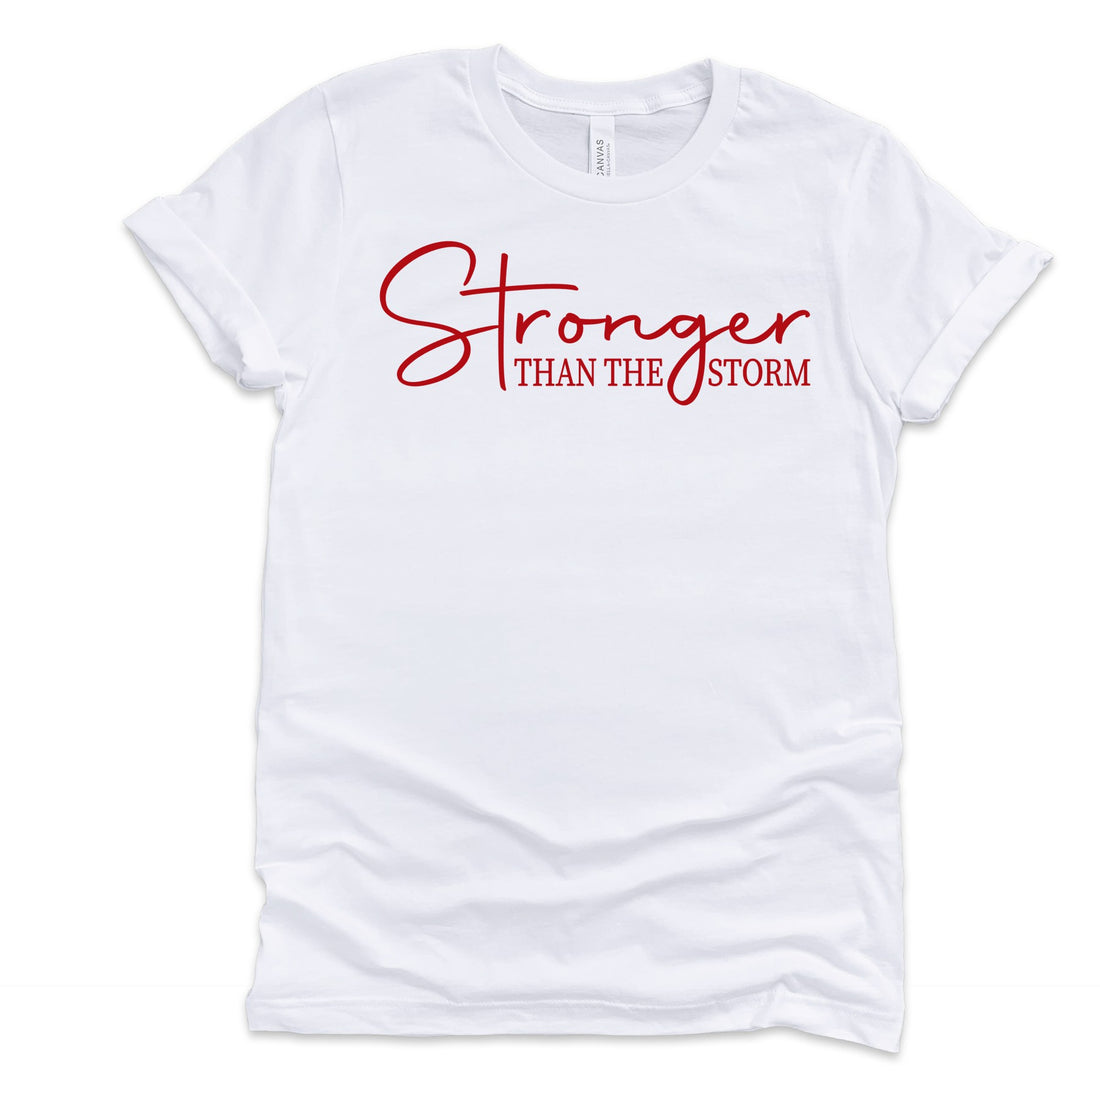 Profyle District - Stronger Than The Storm - T-Shirts - White